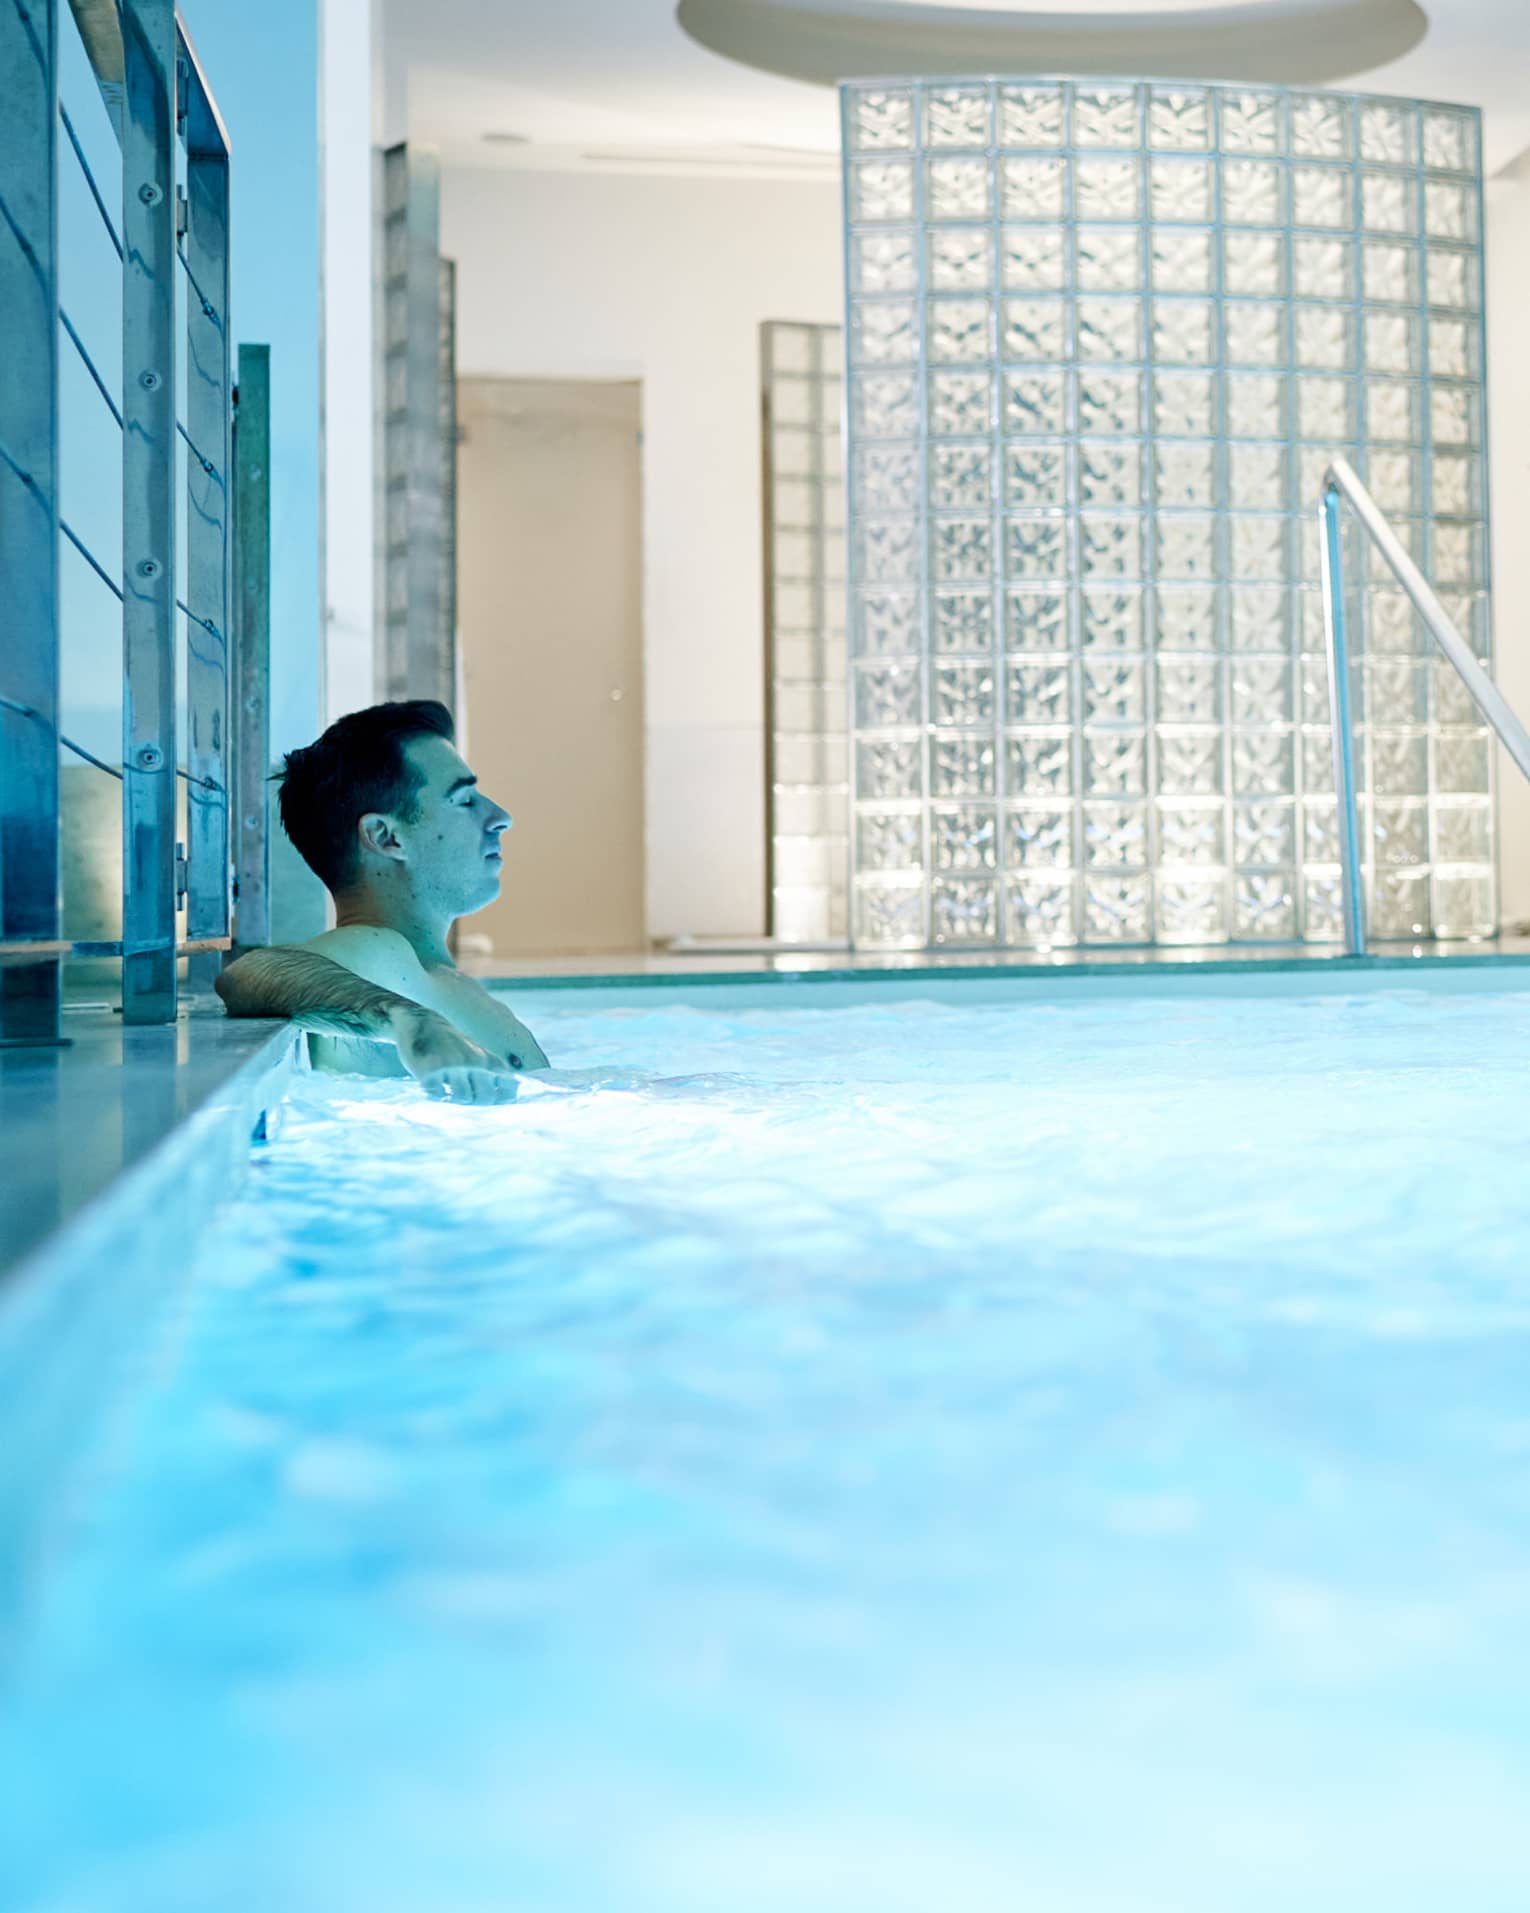 Man leans back in indoor pool with blue illuminated water